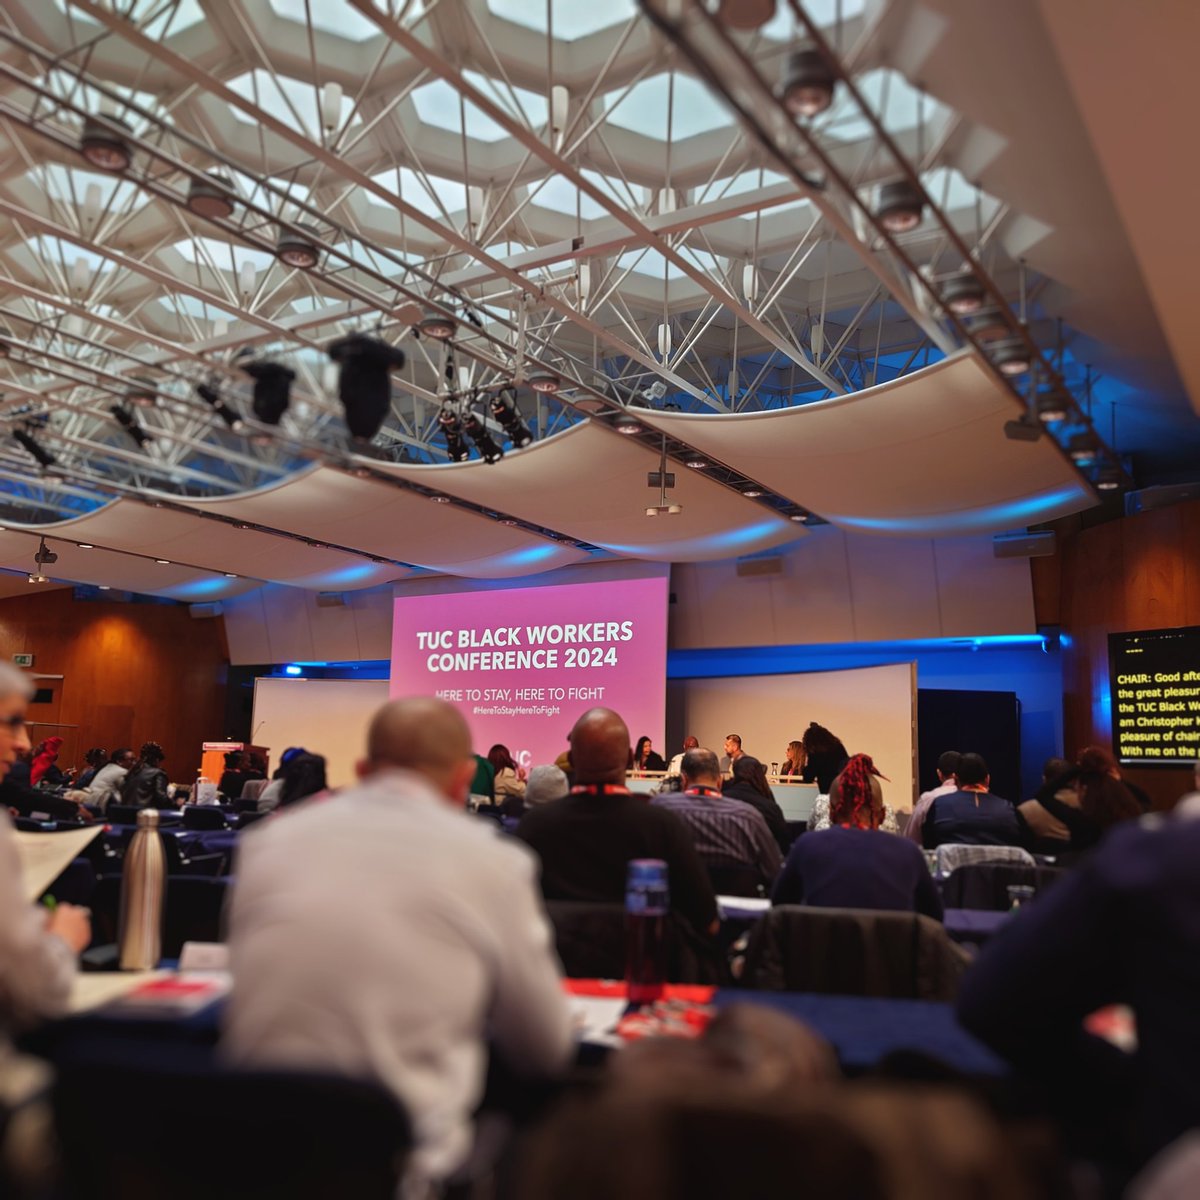 I am honoured to be here at the @The_TUC Black Workers Conference 2024!

@TUCEquality 
@CWUnews 
@cwueducation 
@CWUYoungWorkers 
@CWUTyneAndWear 

#HeretoStayHeretoFight
#CWUandProud